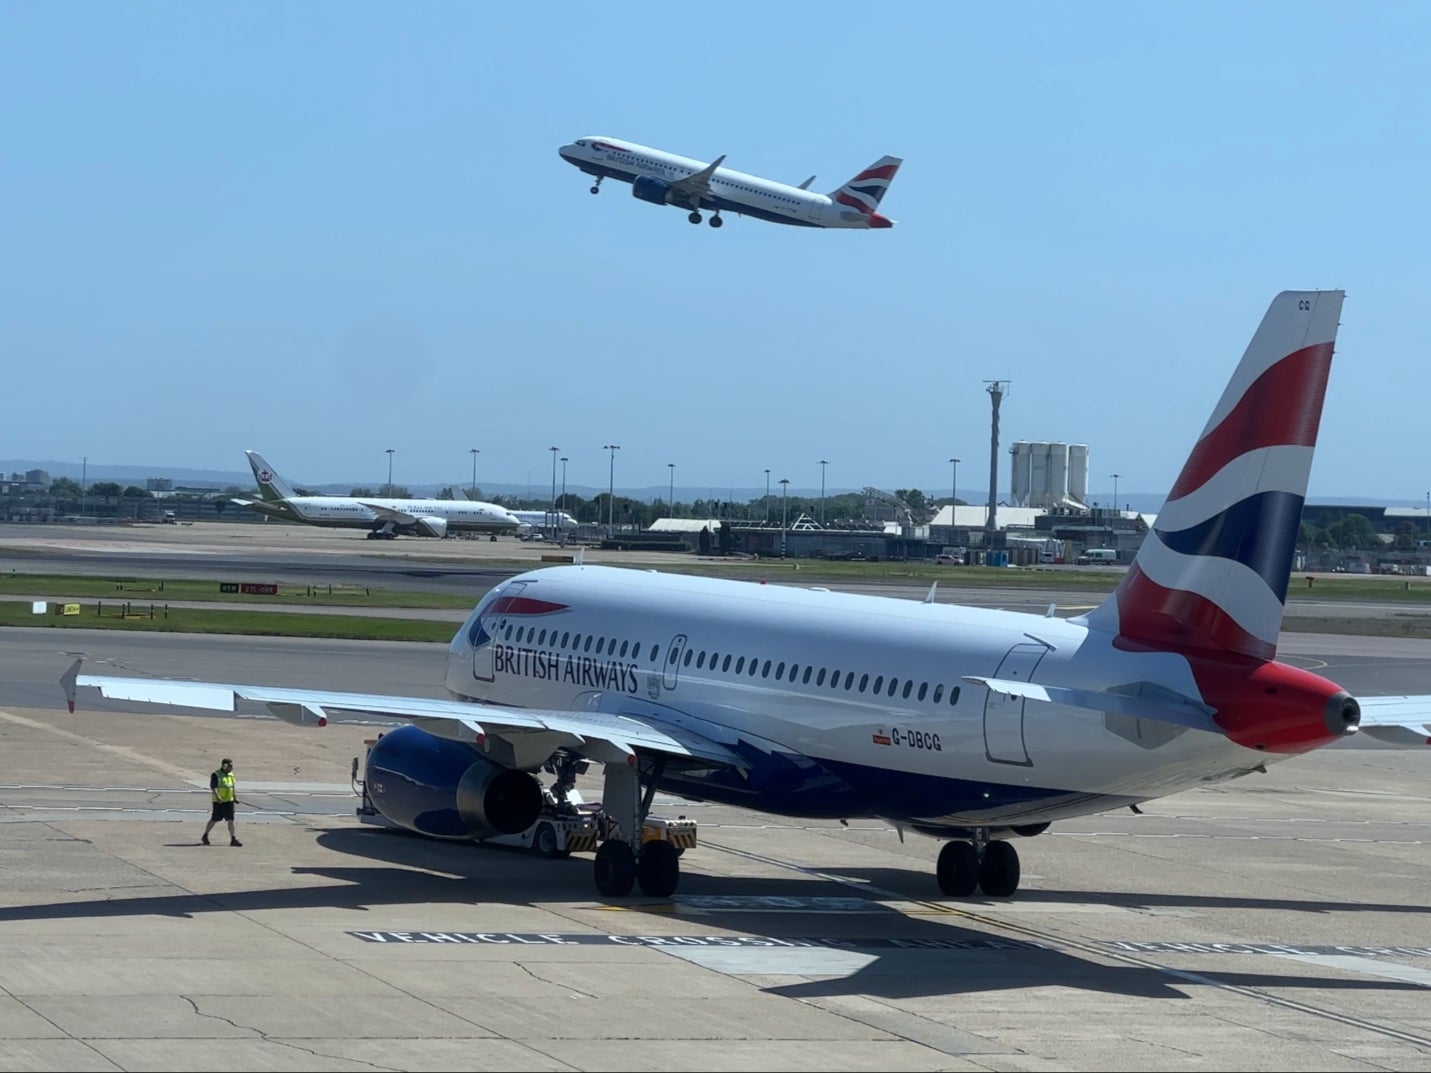 Book cheap American Airlines flights in 2023 with British Airways Avios